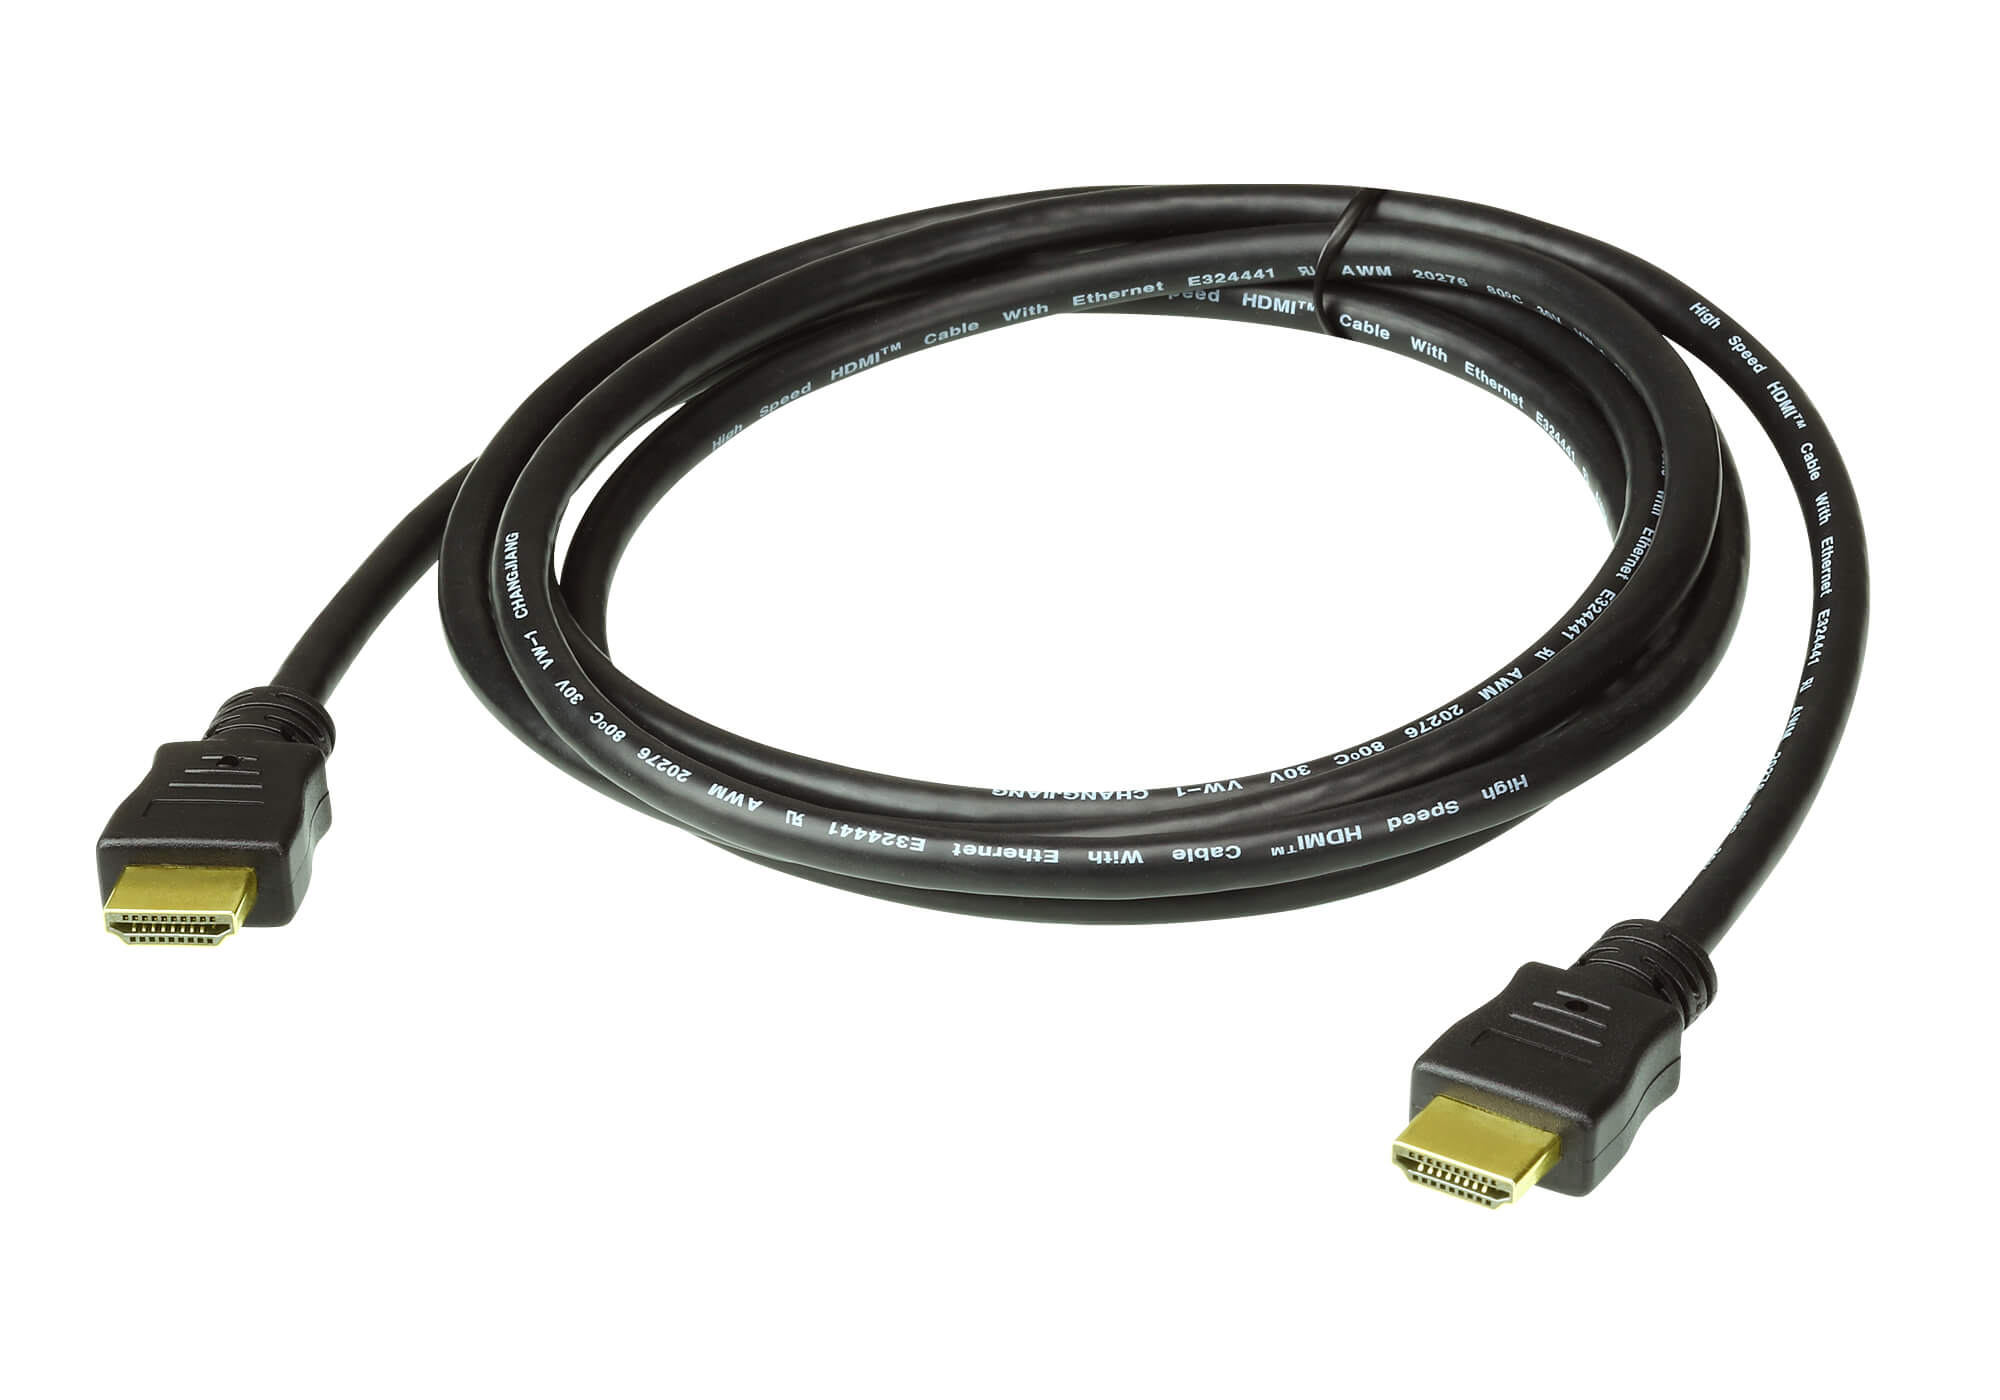 Aten, 2M, High, Speed, HDMI, Cable, with, Ethernet., Support, 4K, UHD, DCI, up, to, 4096, x, 2160, @, 60Hz., 